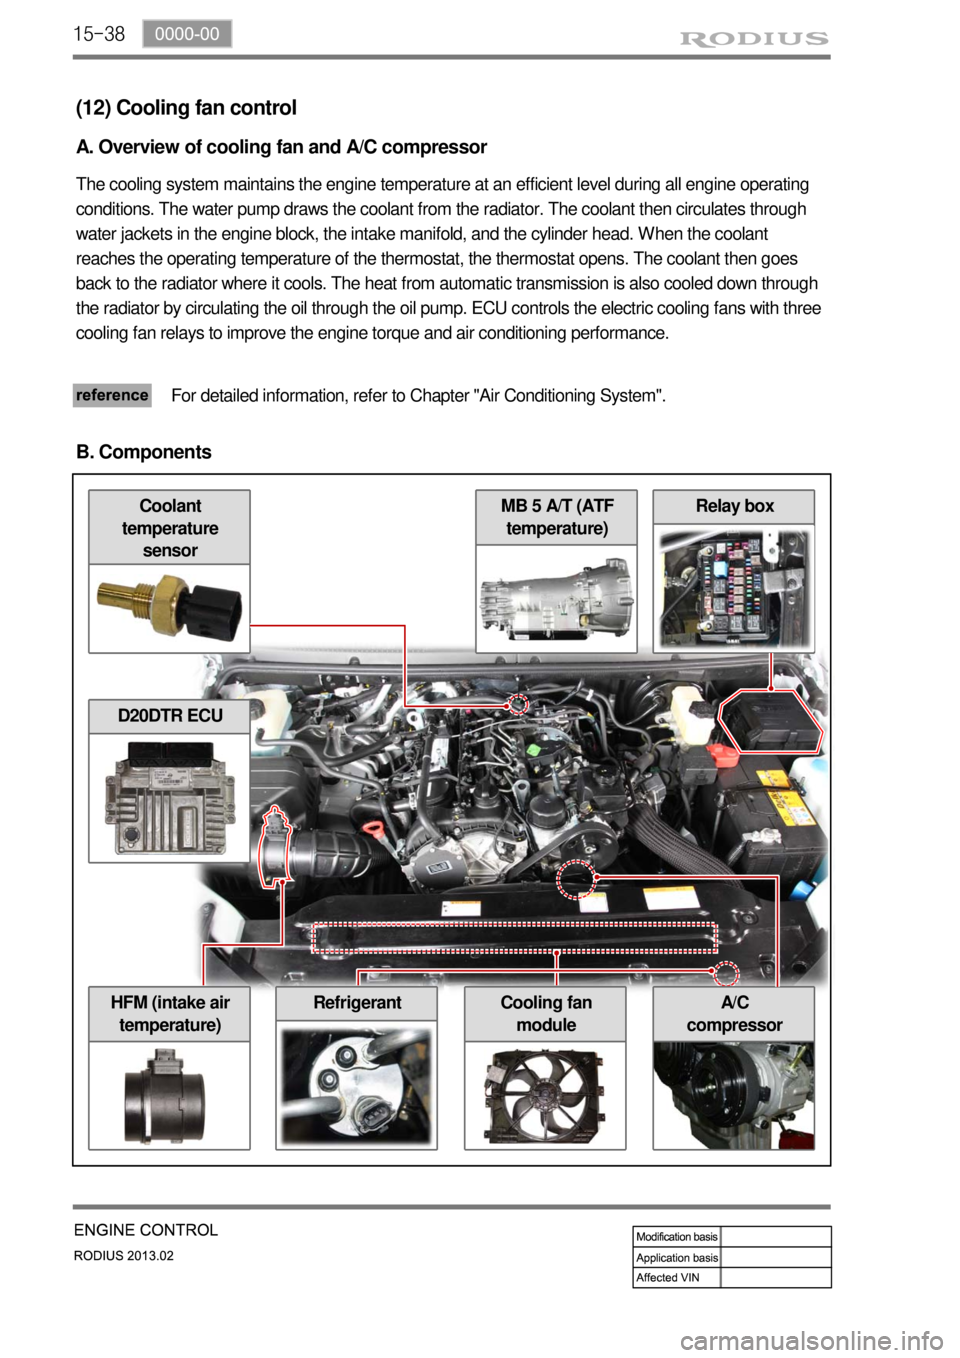 SSANGYONG TURISMO 2013  Service Manual 15-38
Relay box
A/C 
compressorHFM (intake air 
temperature)Cooling fan 
module
MB 5 A/T (ATF 
temperature)Coolant 
temperature 
sensor
(12) Cooling fan control
A. Overview of cooling fan and A/C comp